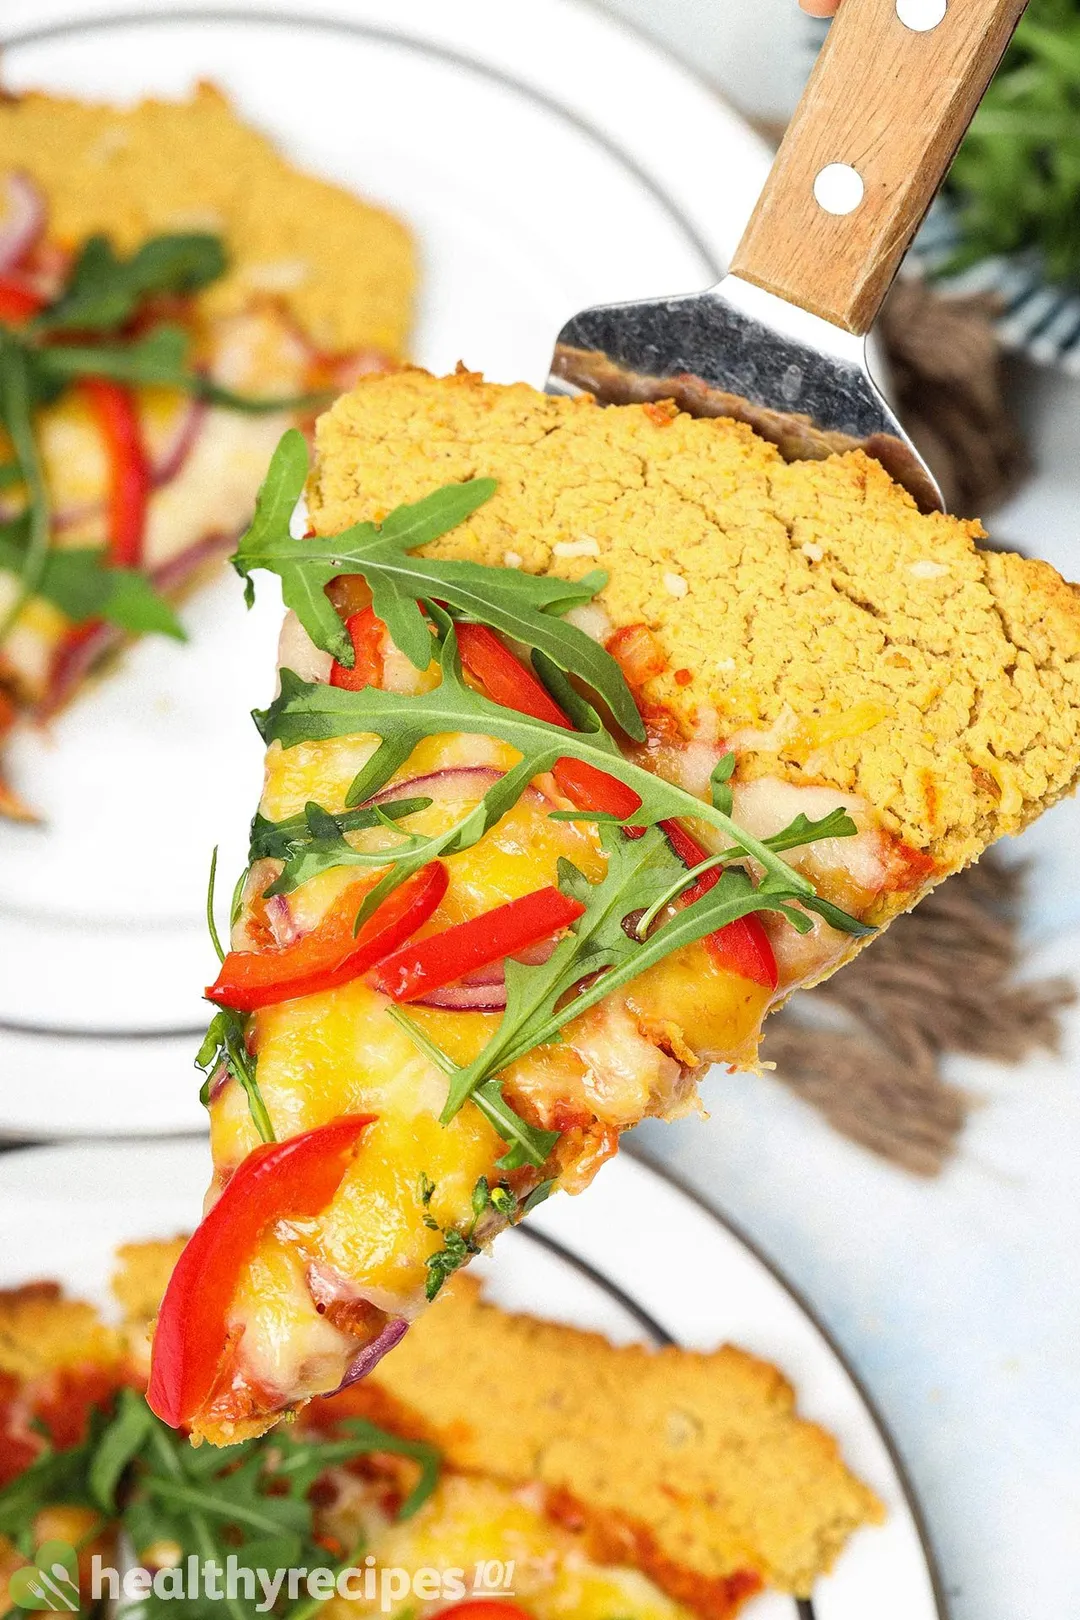 a pea of chickpea pizza crust